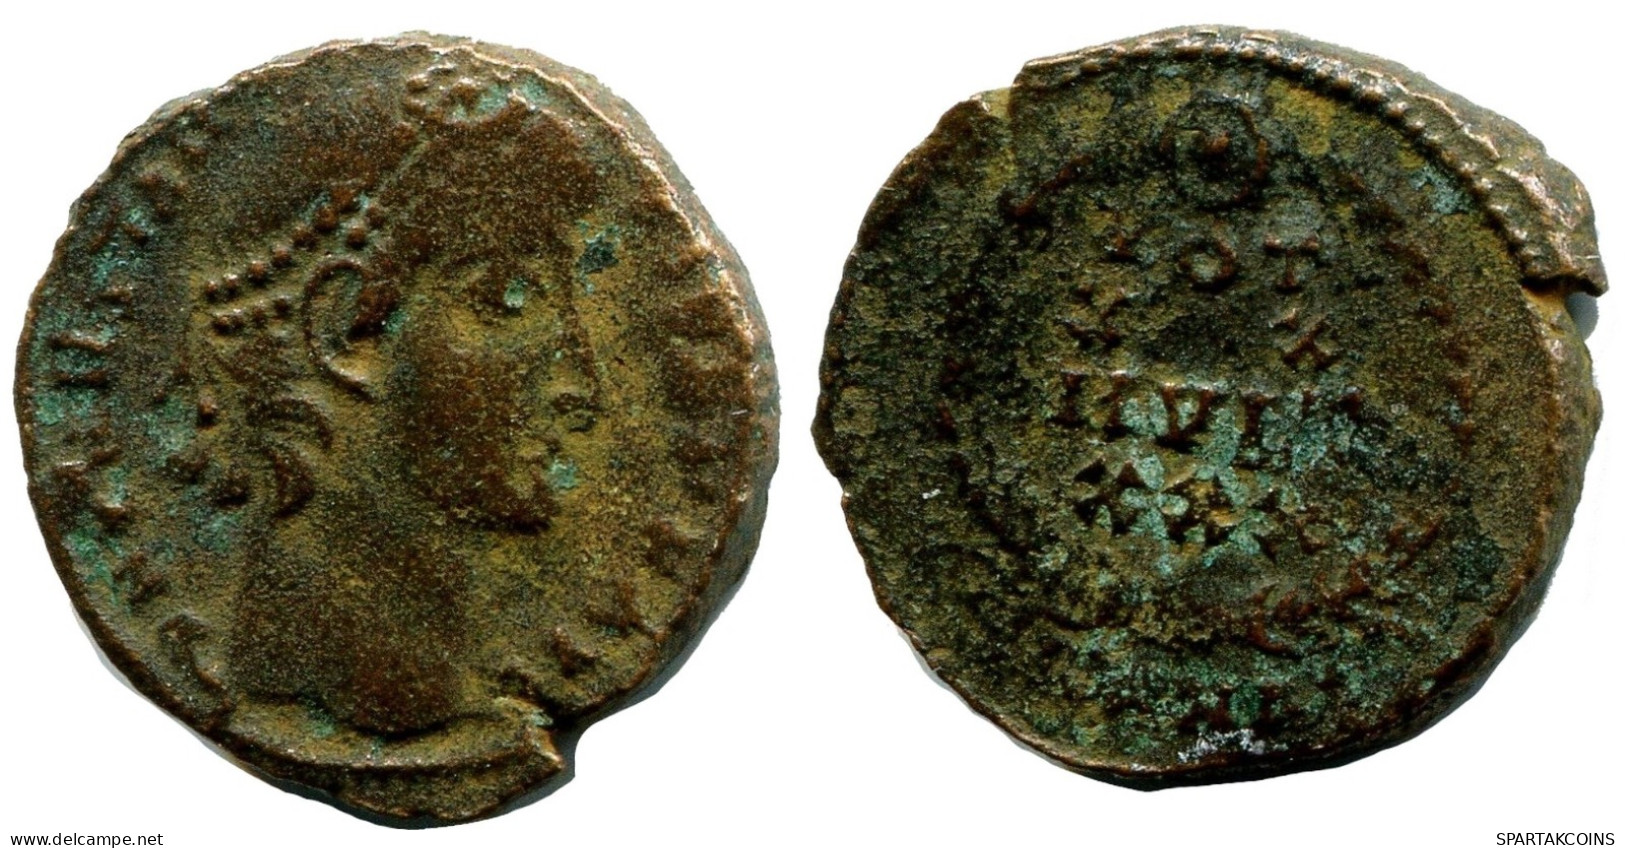 CONSTANTIUS II MINTED IN ANTIOCH FROM THE ROYAL ONTARIO MUSEUM #ANC11229.14.E.A - El Impero Christiano (307 / 363)